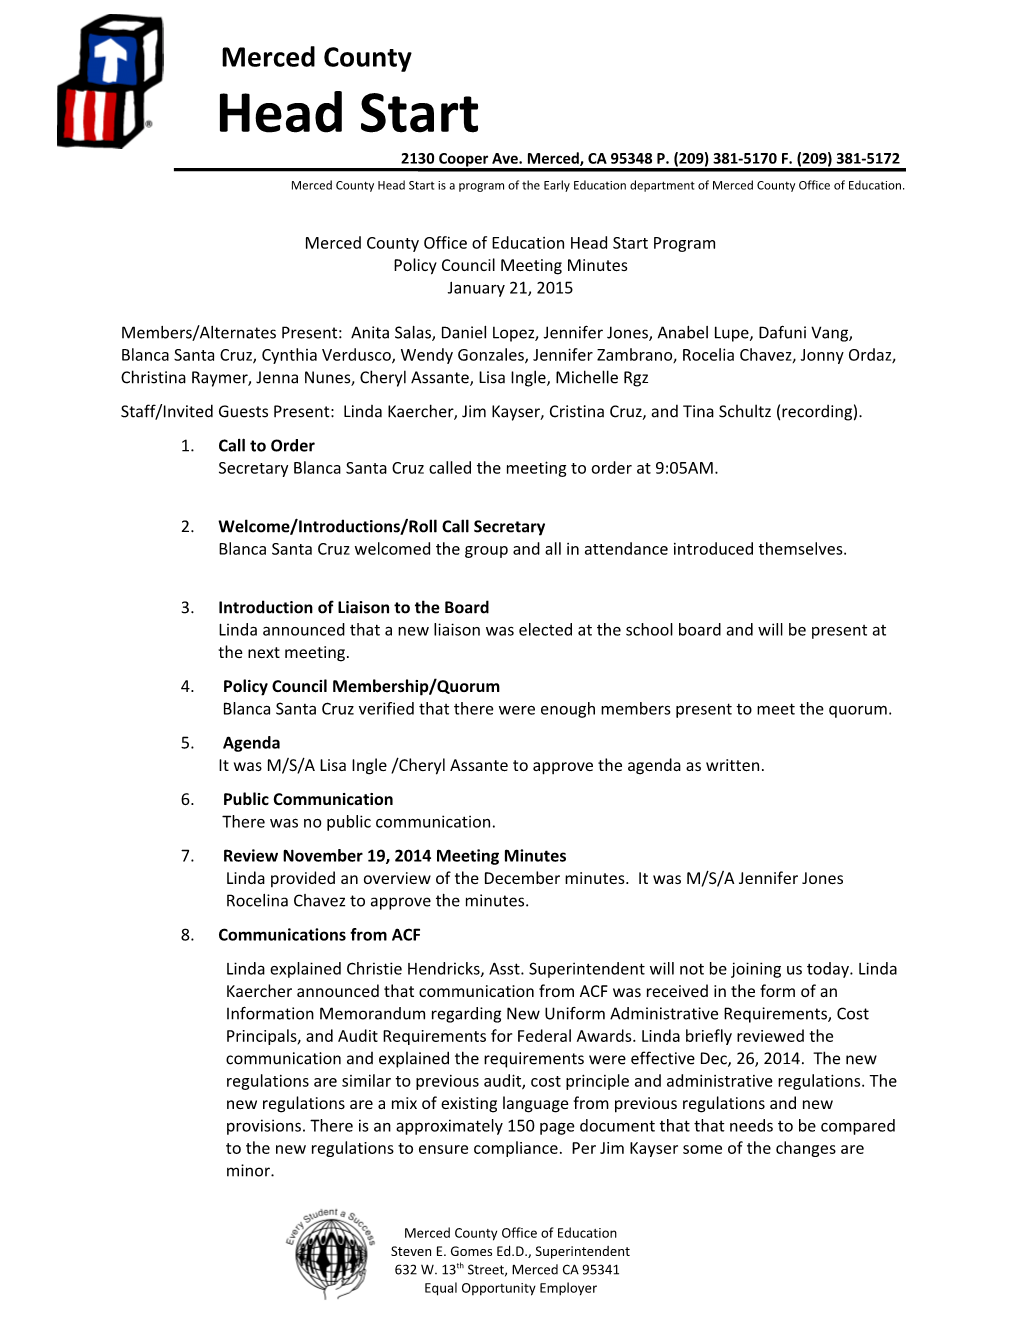 Minutes (DRAFT) 1/21/15 Policy Council